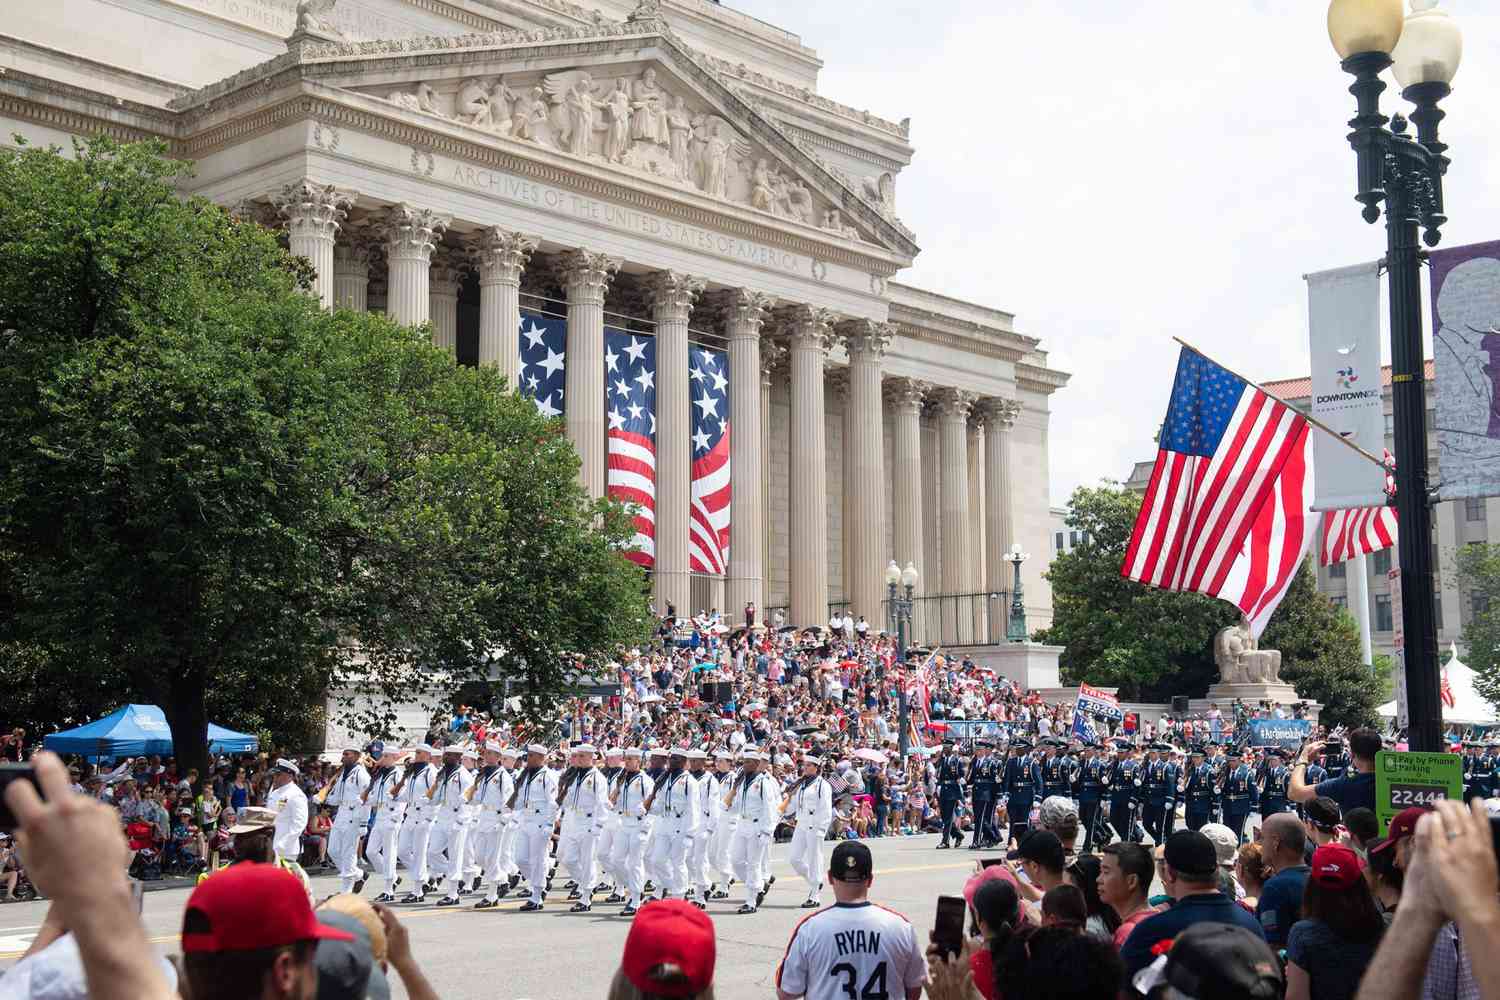 Fourth of July festivities on July 4, 2019 in Washington, DC